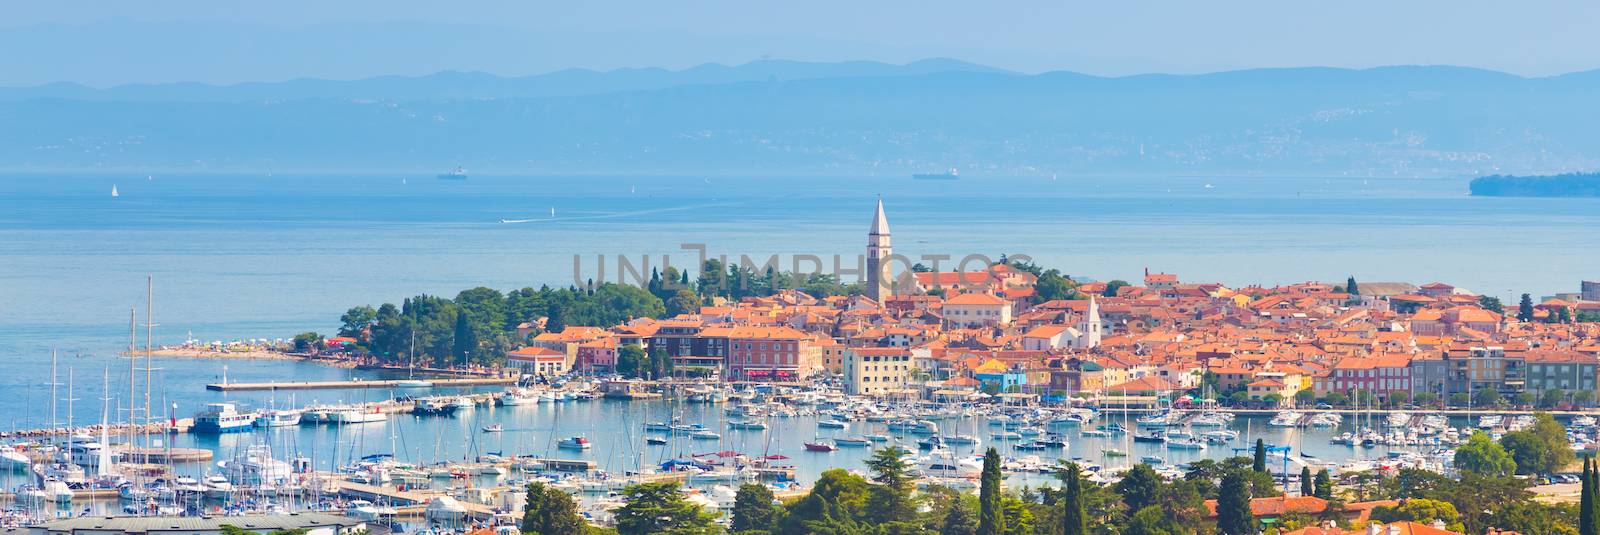 Izola is an old fishing town and a municipality in southwestern Slovenia on the Adriatic coast of the Istrian peninsula.